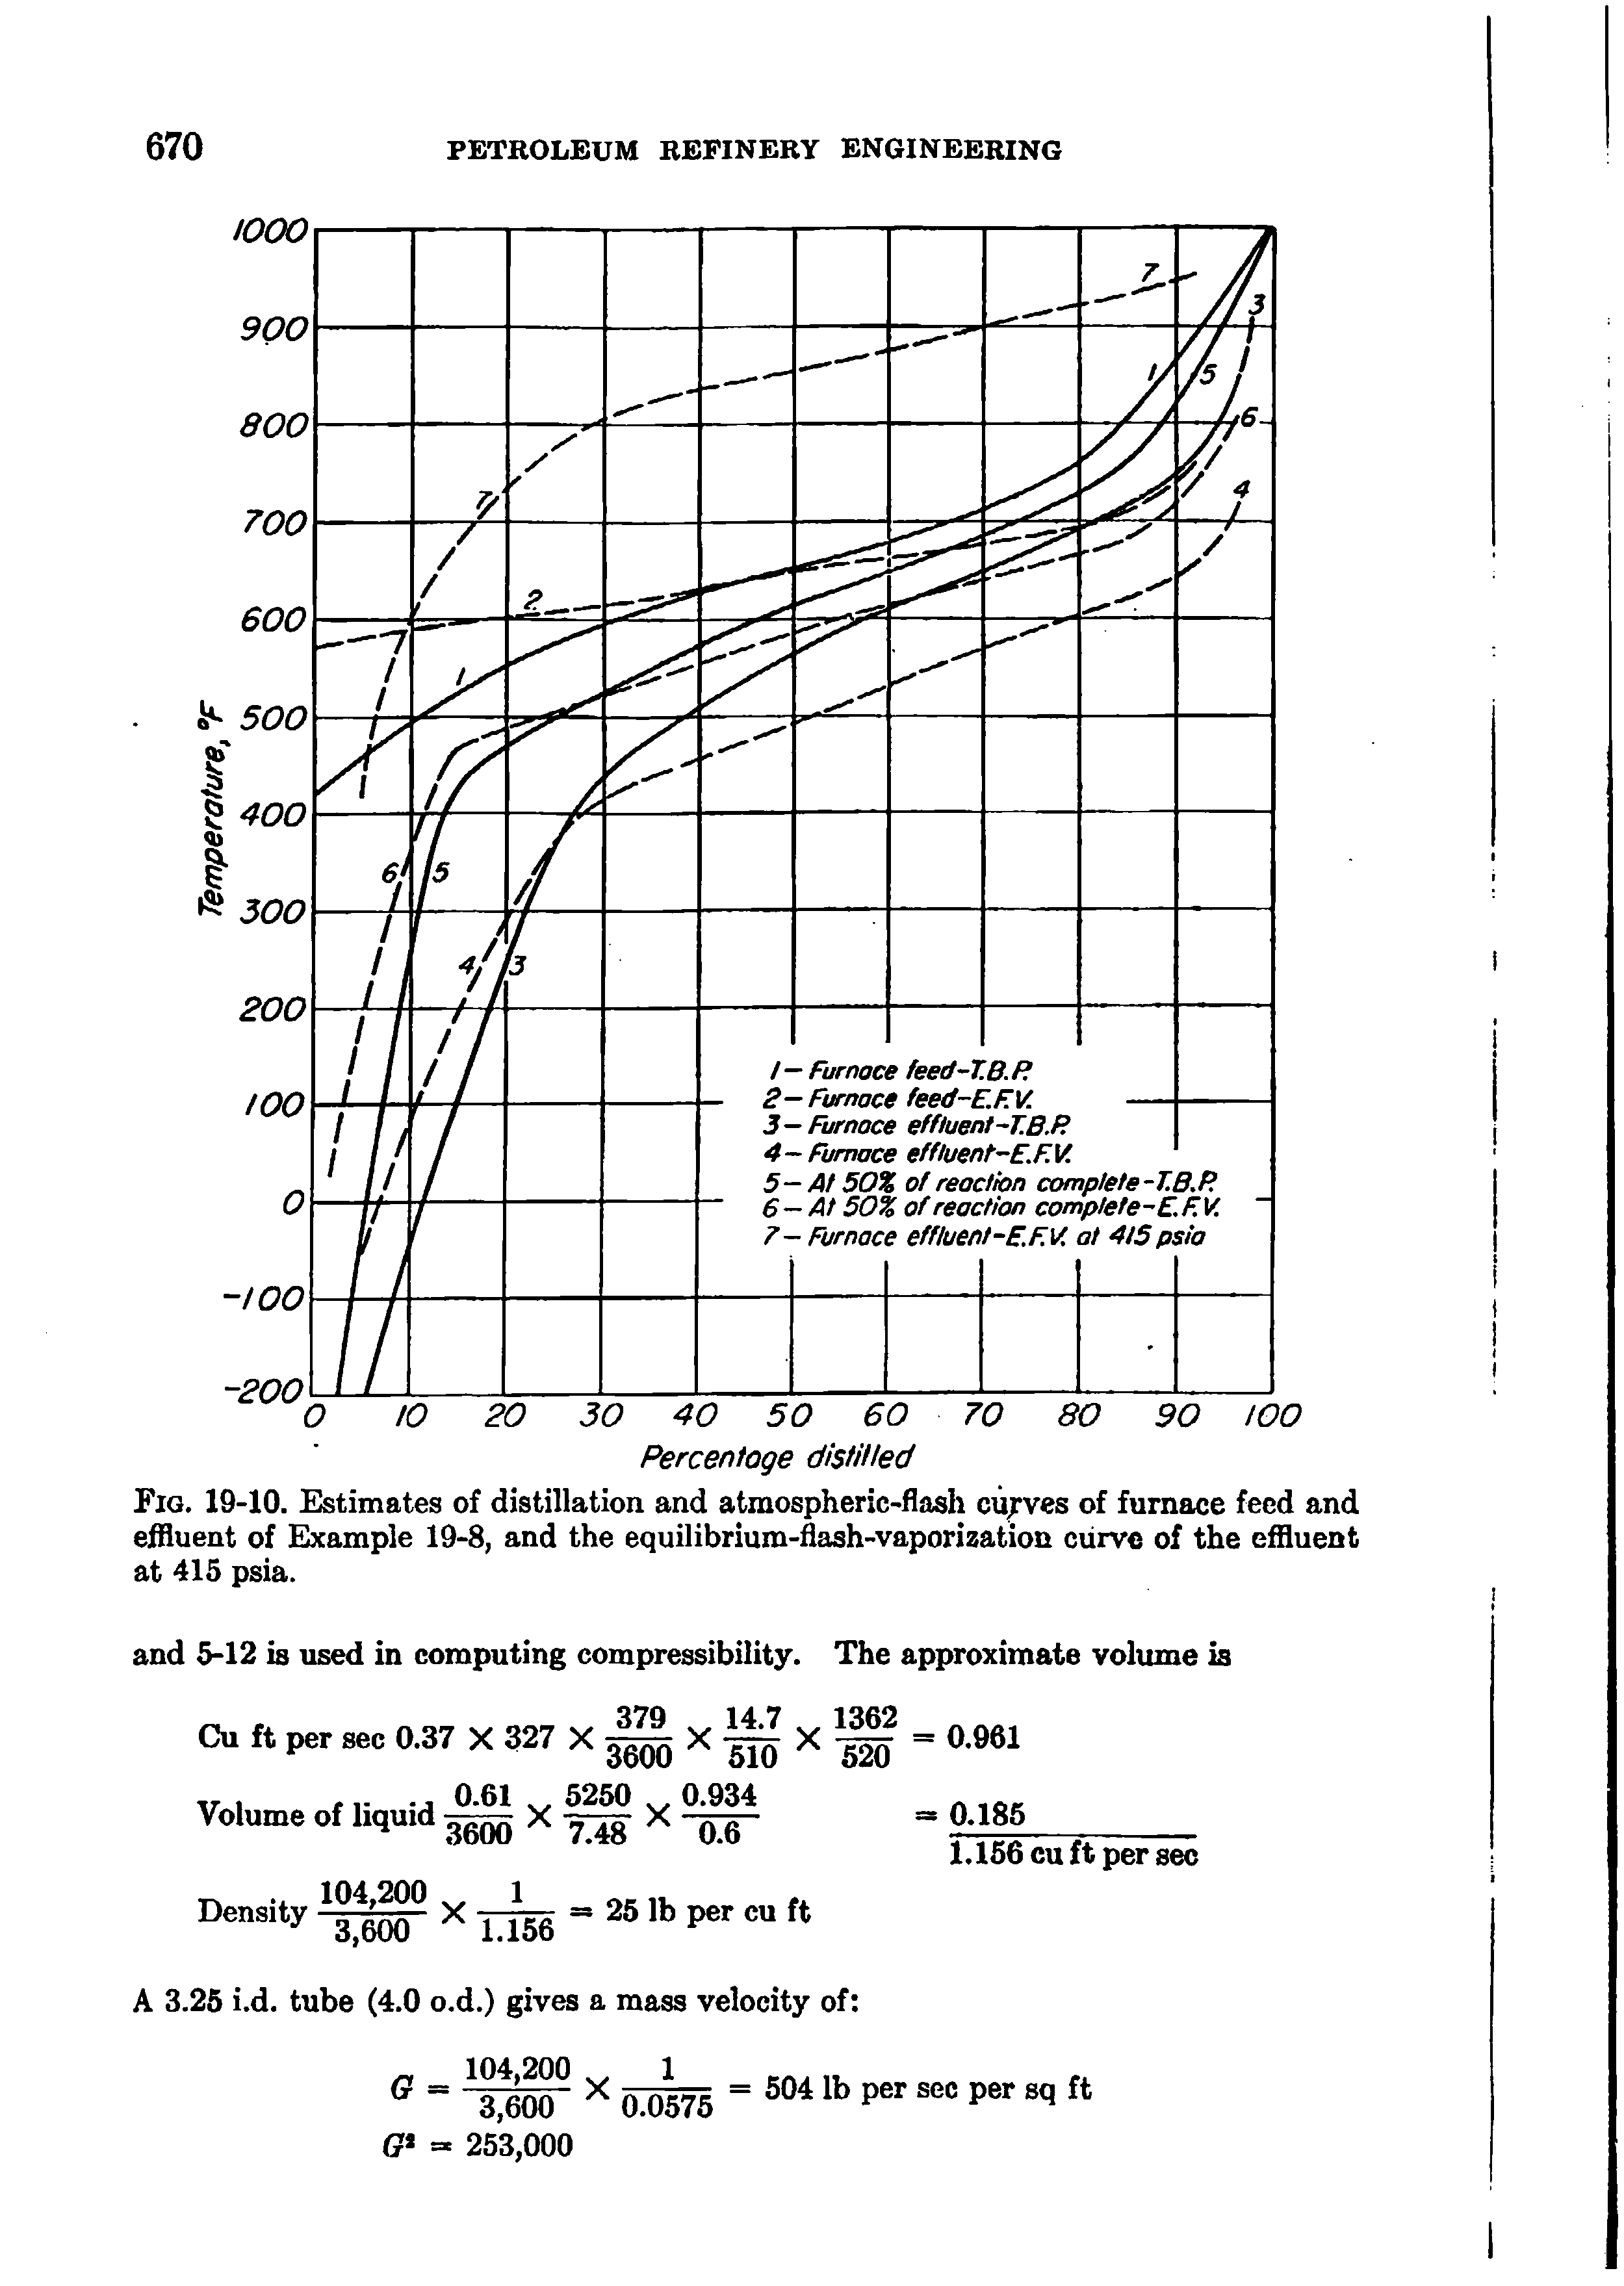 Fig. 19-10. Estimates of distillation and atmospheric-flash cu rves of furnace feed and effluent of Example 19-8, and the equilibrium-flash-vaporization curve of the effluent at 415 psia.